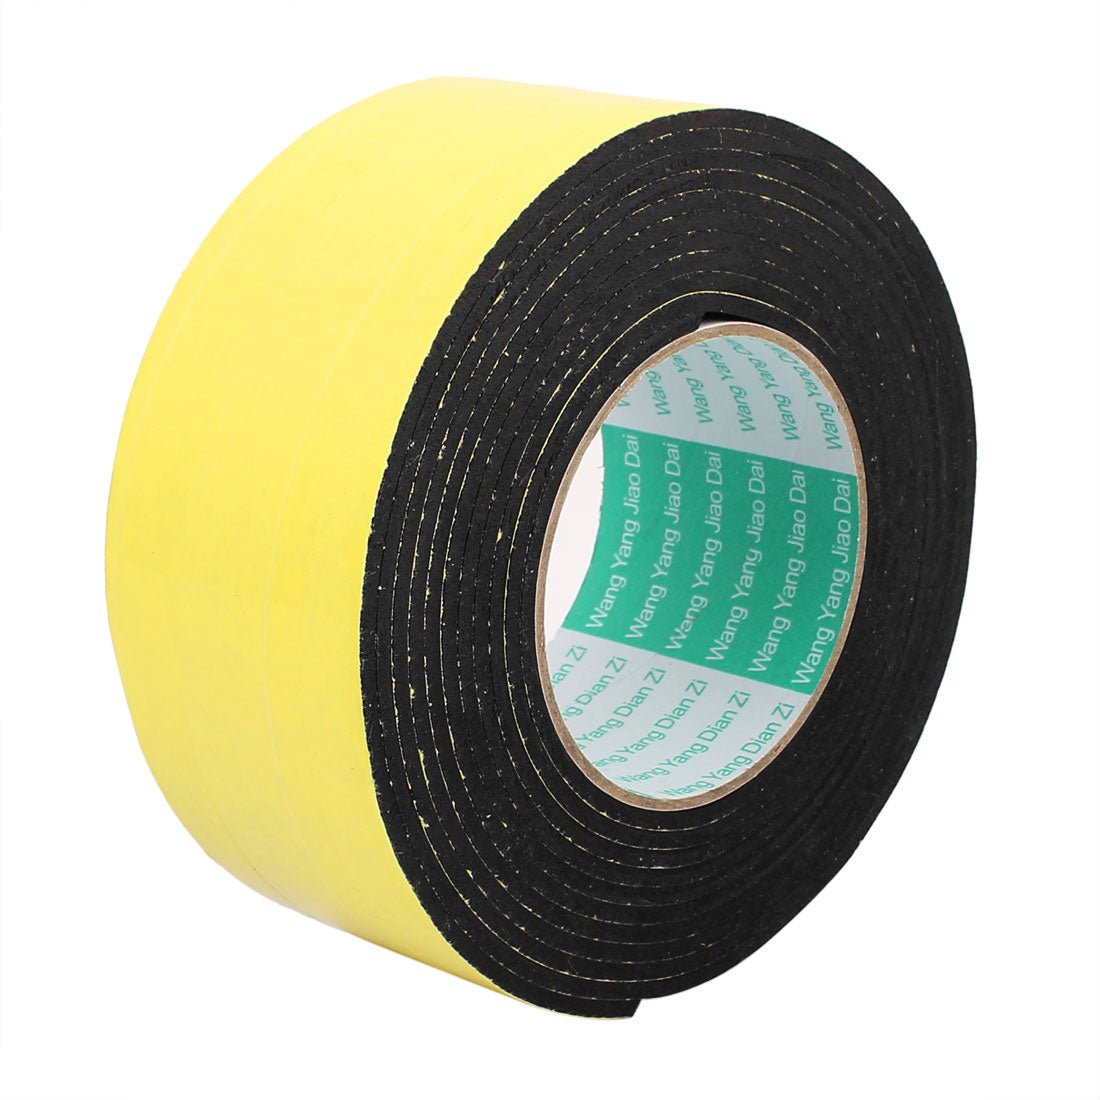 uxcell Uxcell Single Side Shockproof Foam Tape Adhesive Sponge Tape 60mm Wide x 4M Length